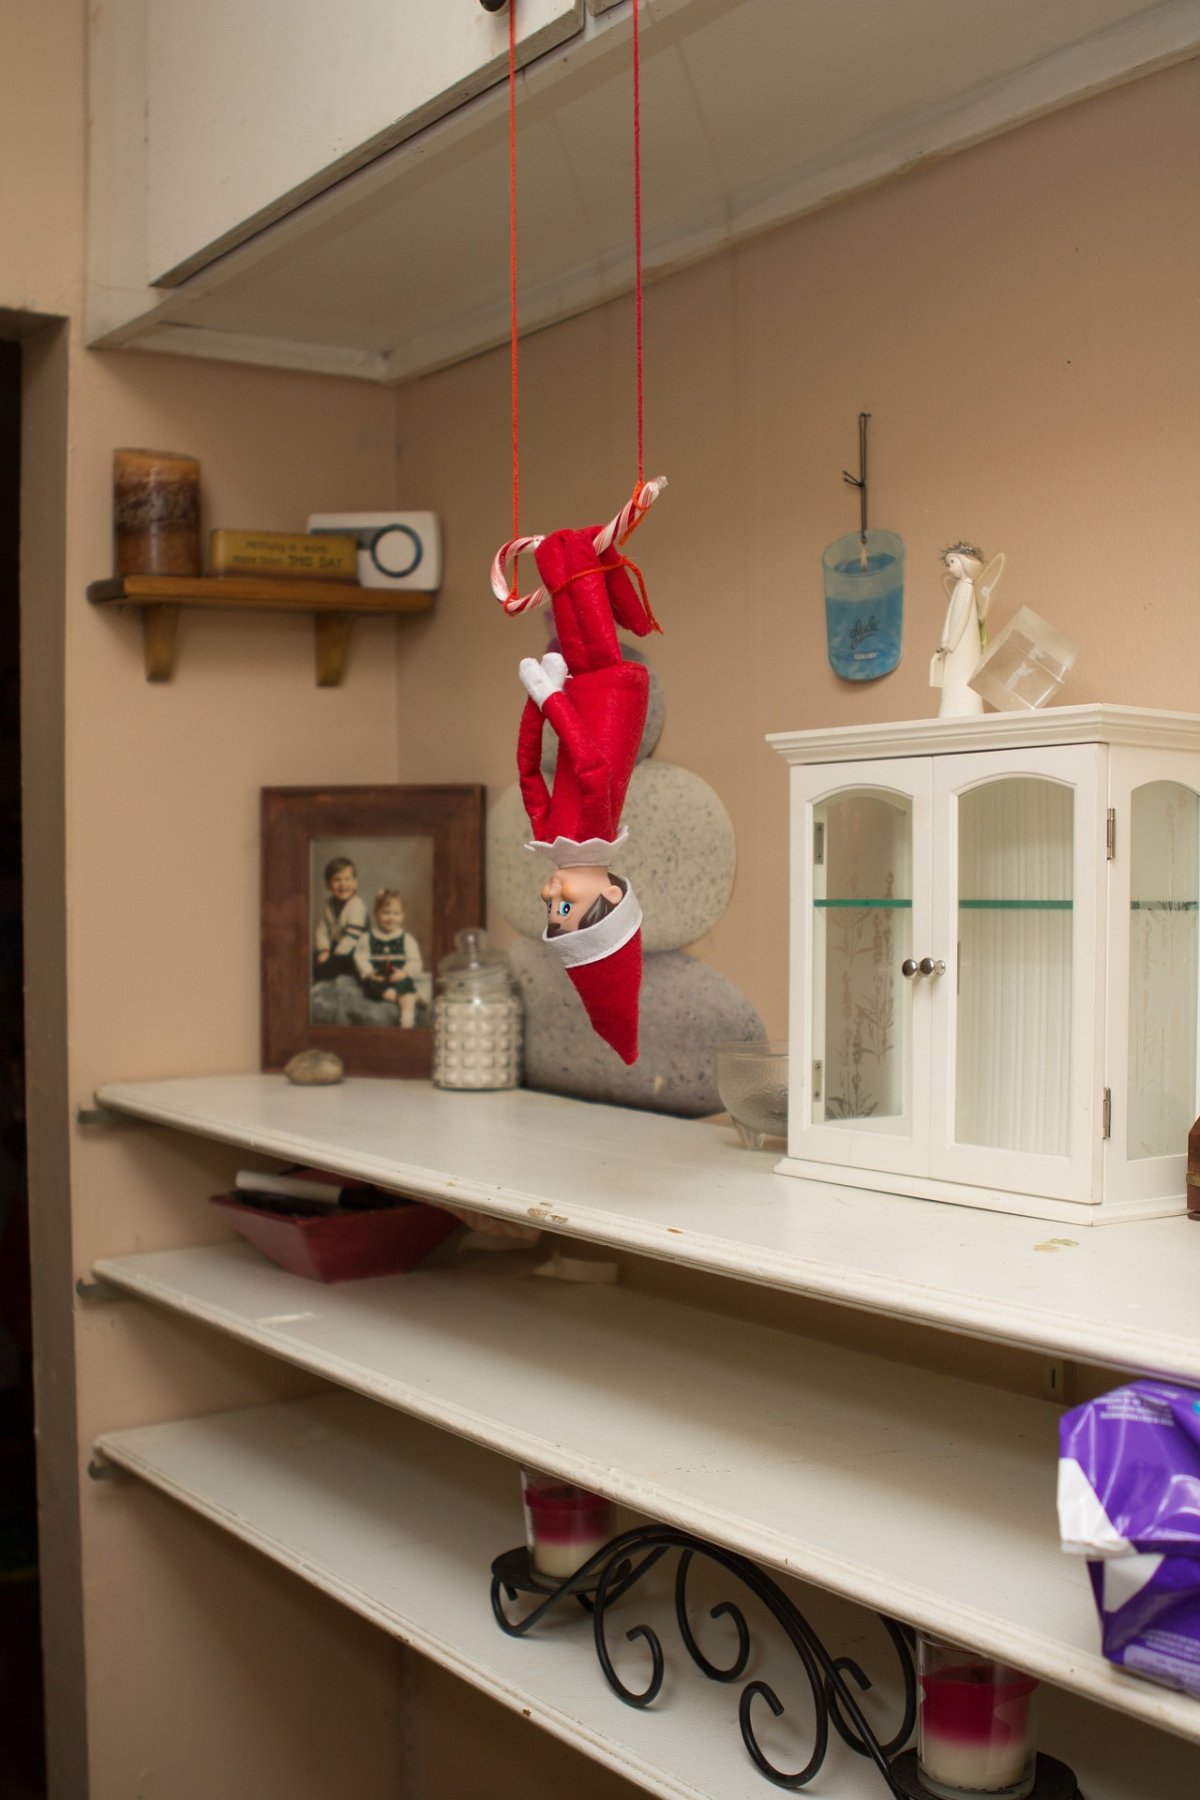 Elf on the Shelf: What is it and why it could make your children paranoid, The Independent